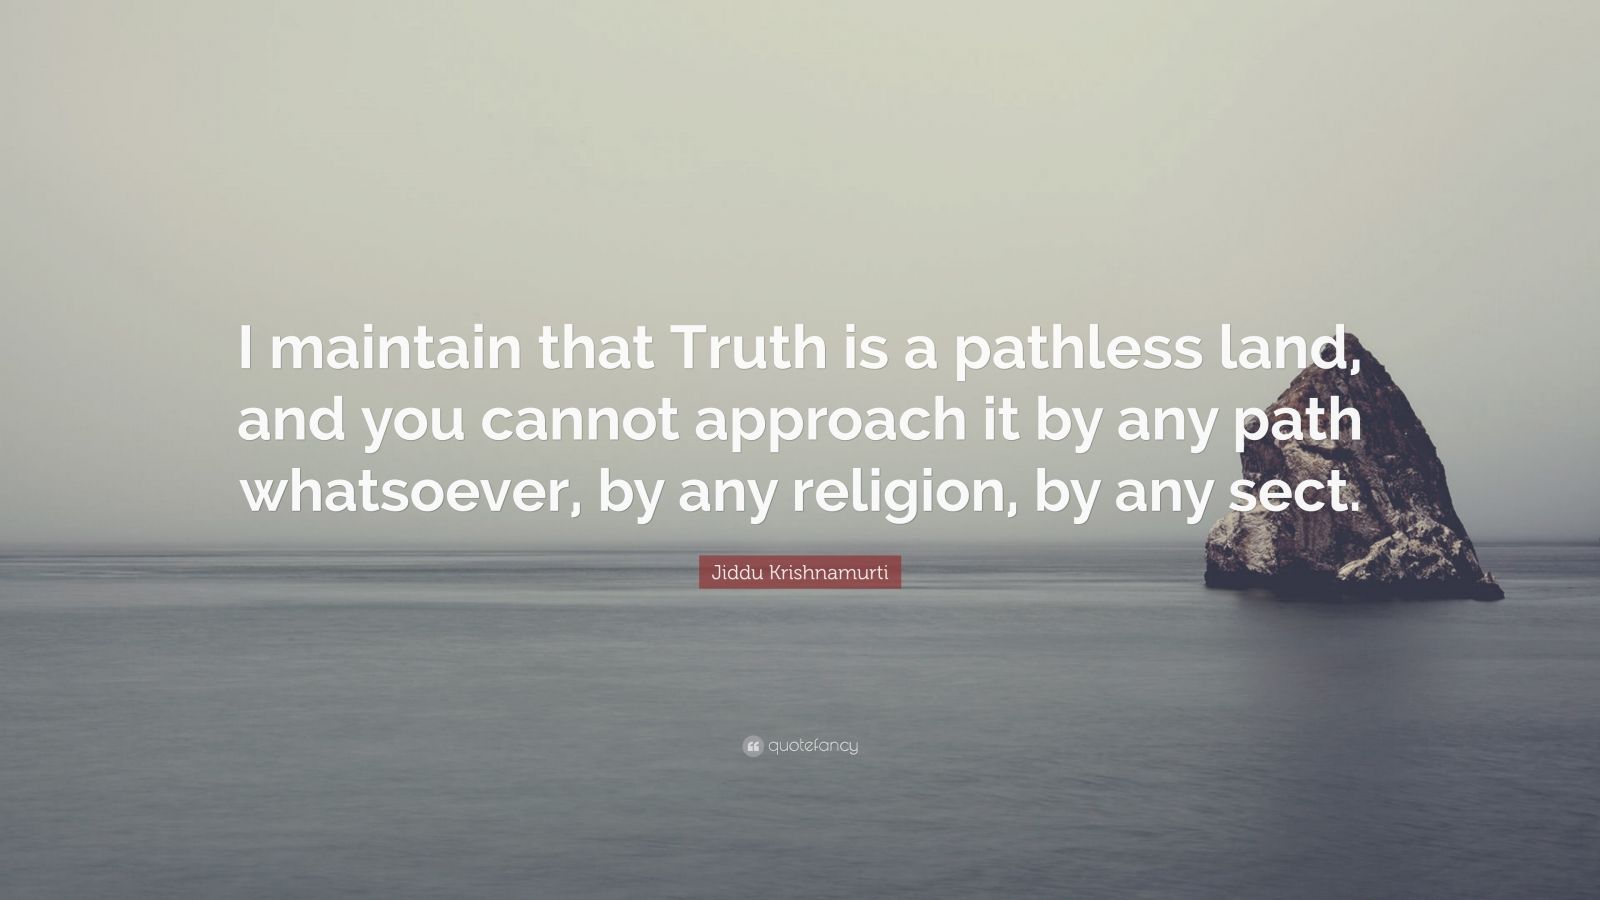 truth is a pathless land